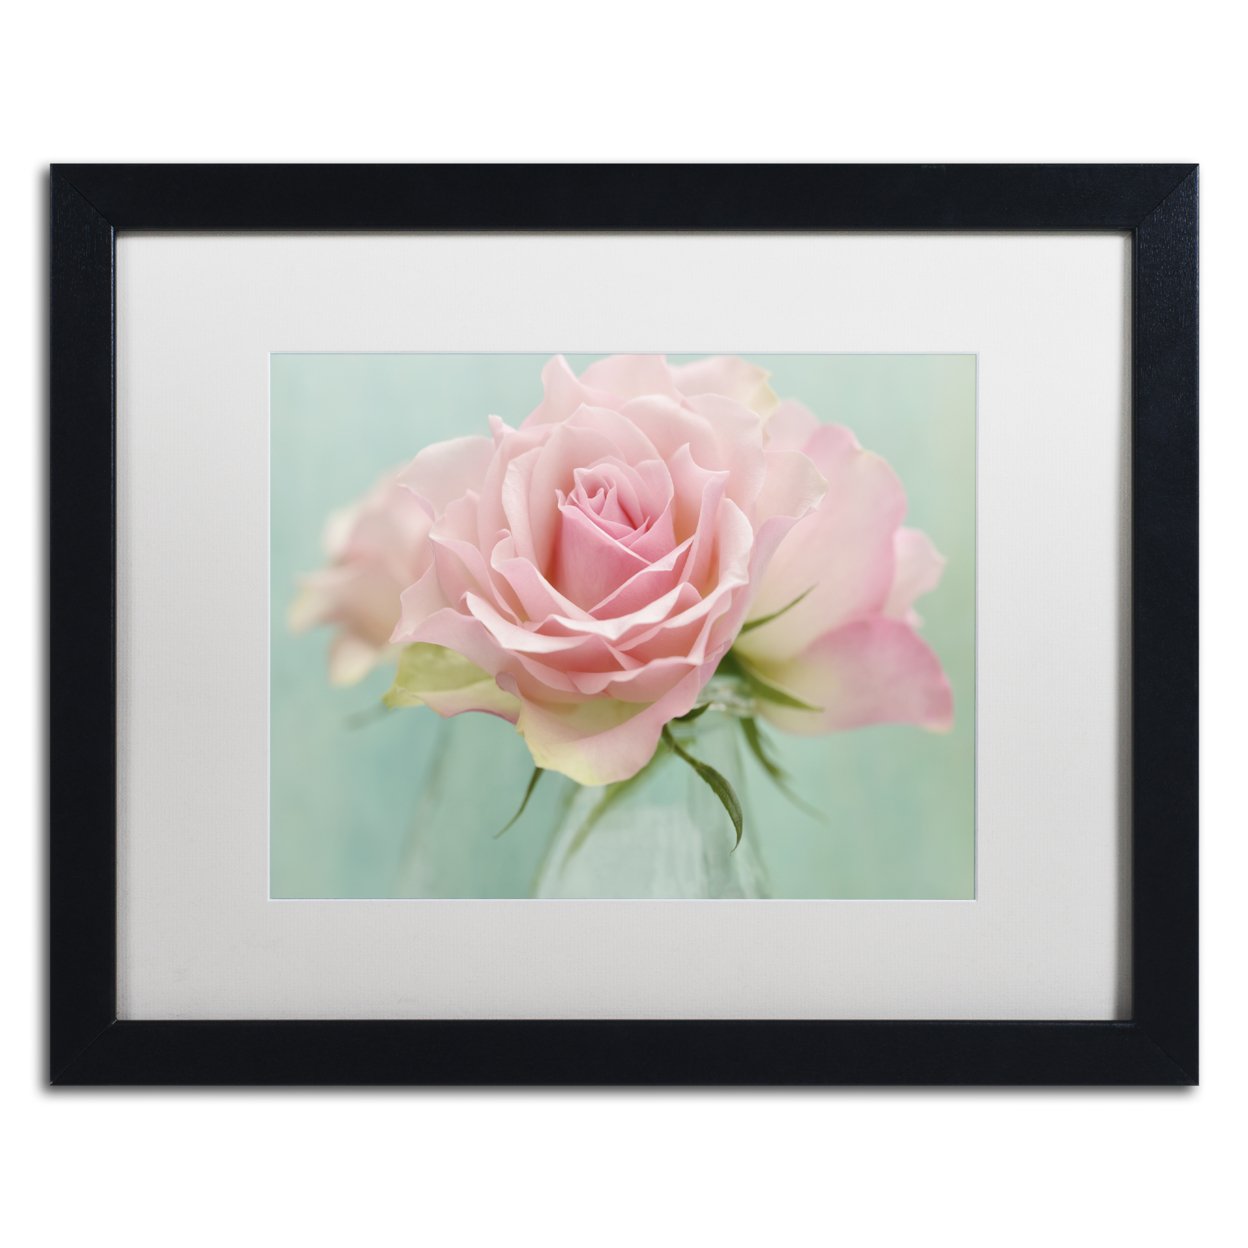 Cora Niele 'Pink Roses' Black Wooden Framed Art 18 X 22 Inches